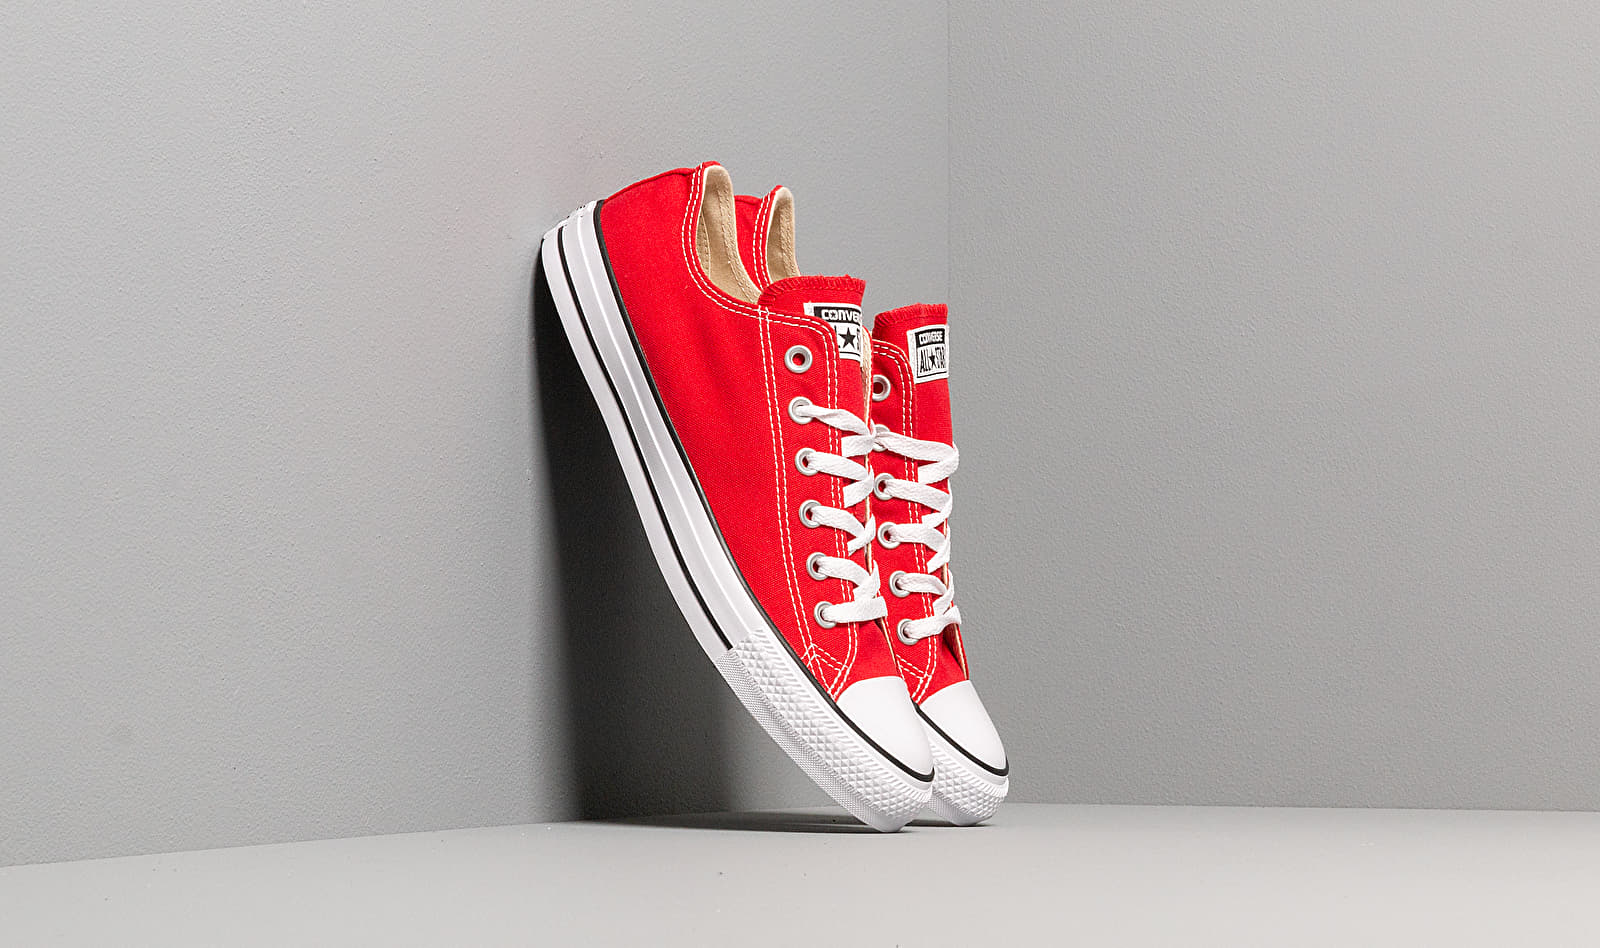 Converse All Star Ox Red